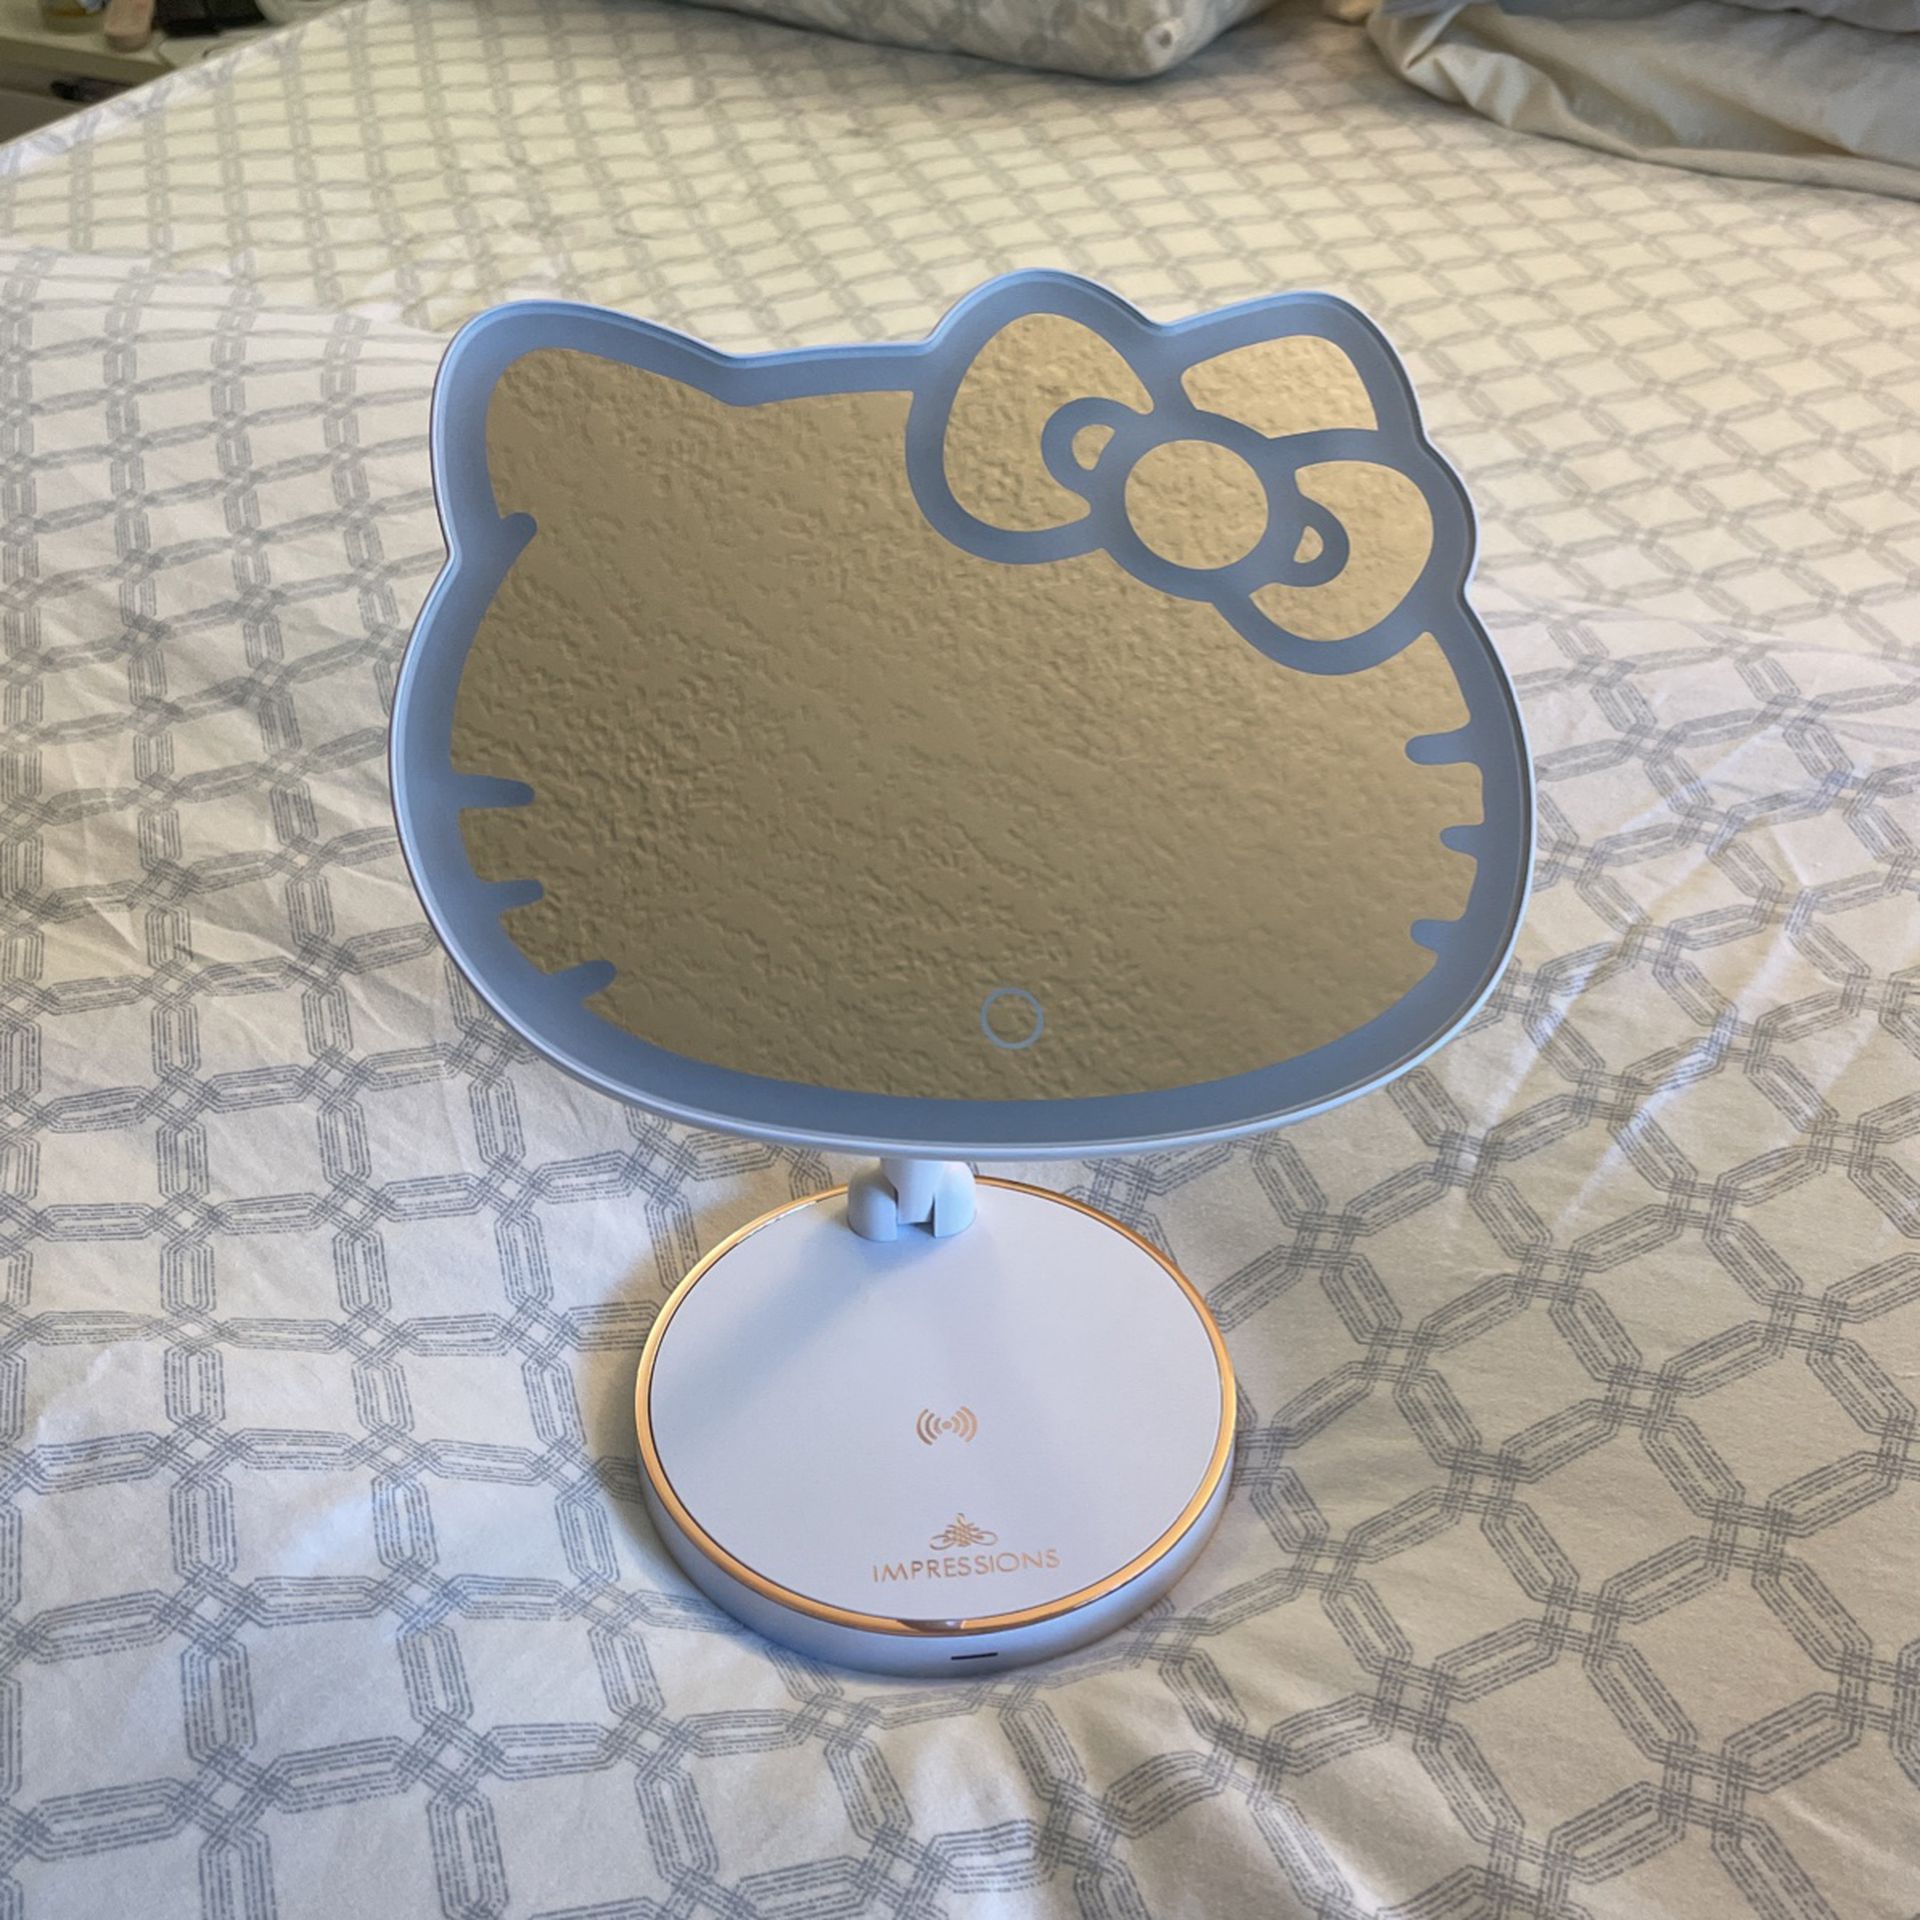 HELLO KITTY LED RECHARGEABLE MAKEUP MIRROR